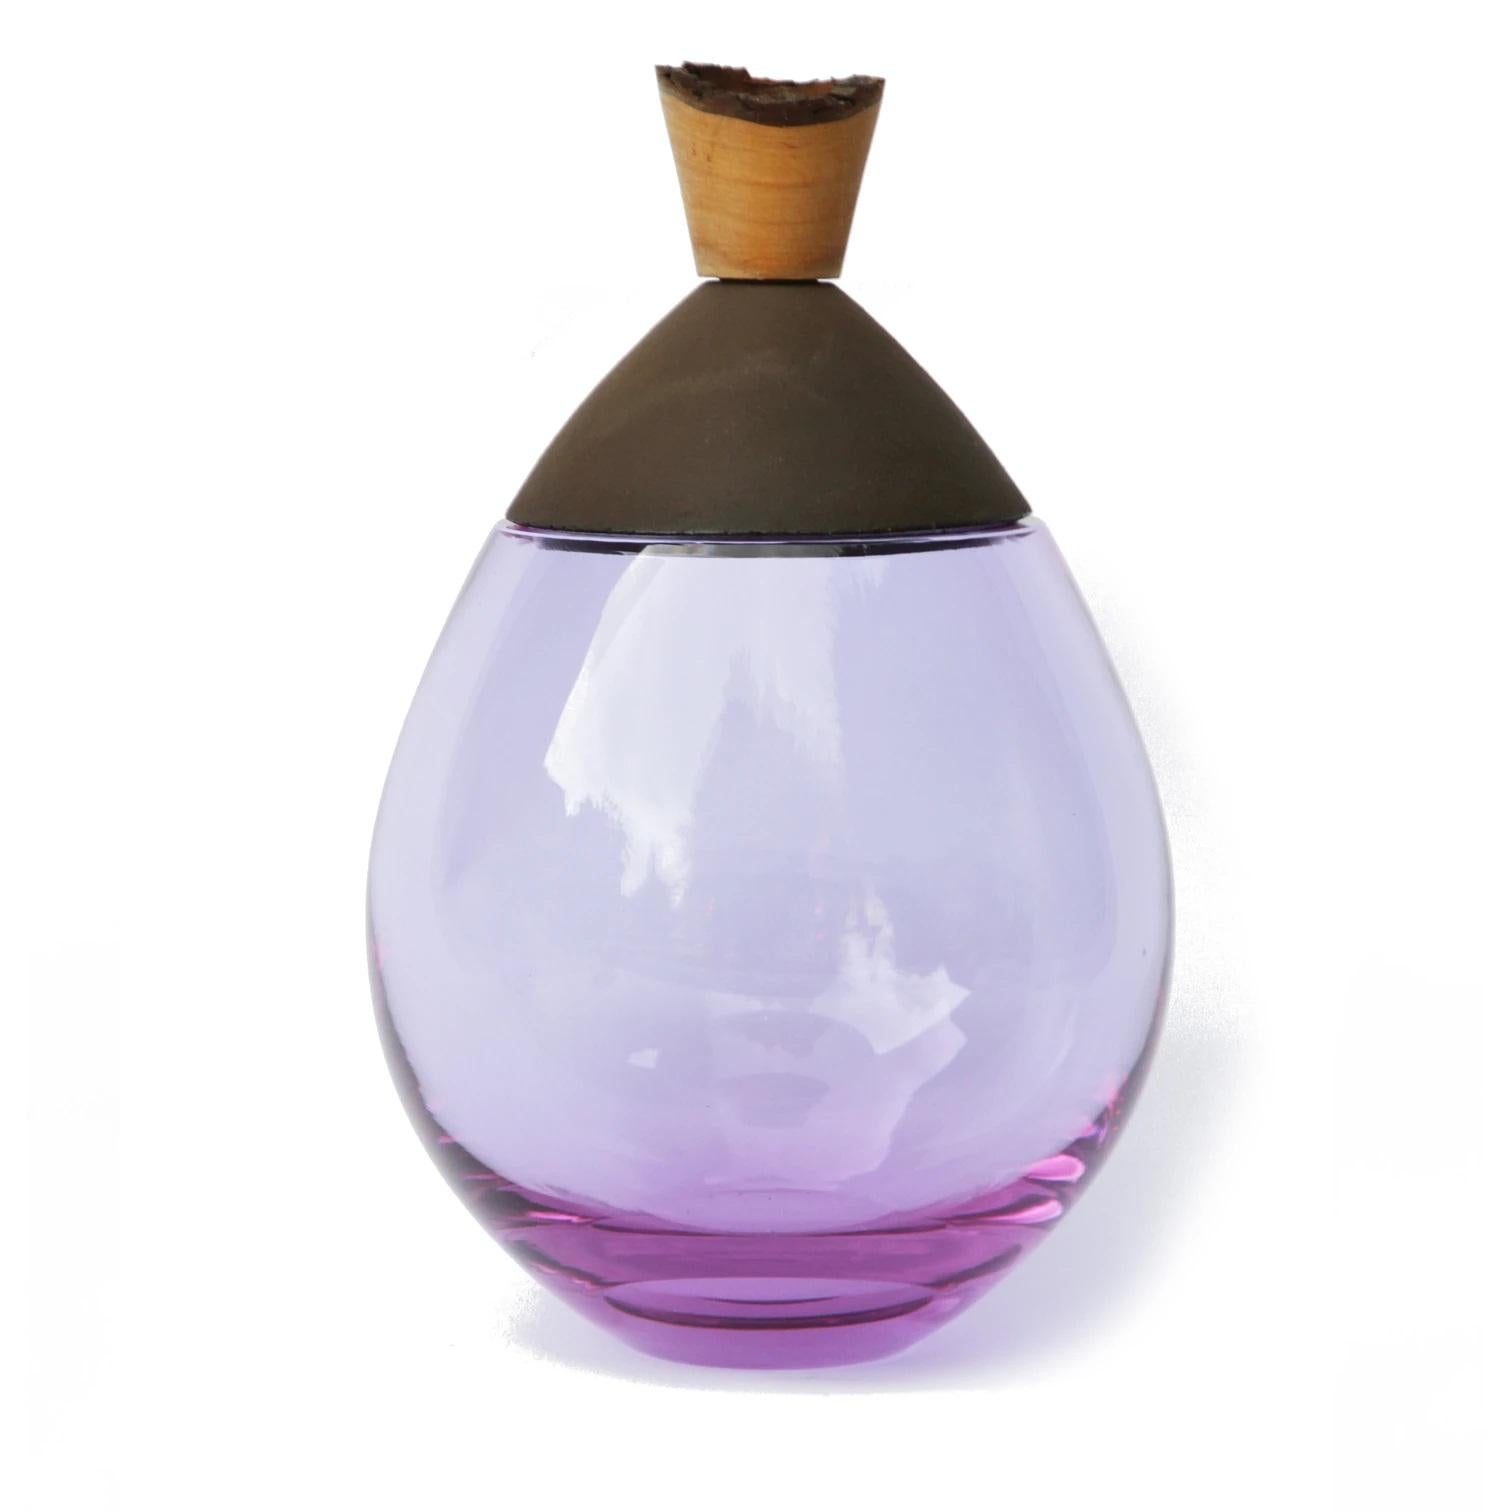 Lavender and black Satu stacking vessel, Pia Wüstenberg
Dimensions: D 19 x H 23
Materials: glass, wood, ceramic
Available in other colors.

Handmade in Europe: handblown glass (Czech Republic), earthenware ceramic (Germany), hand turned wood